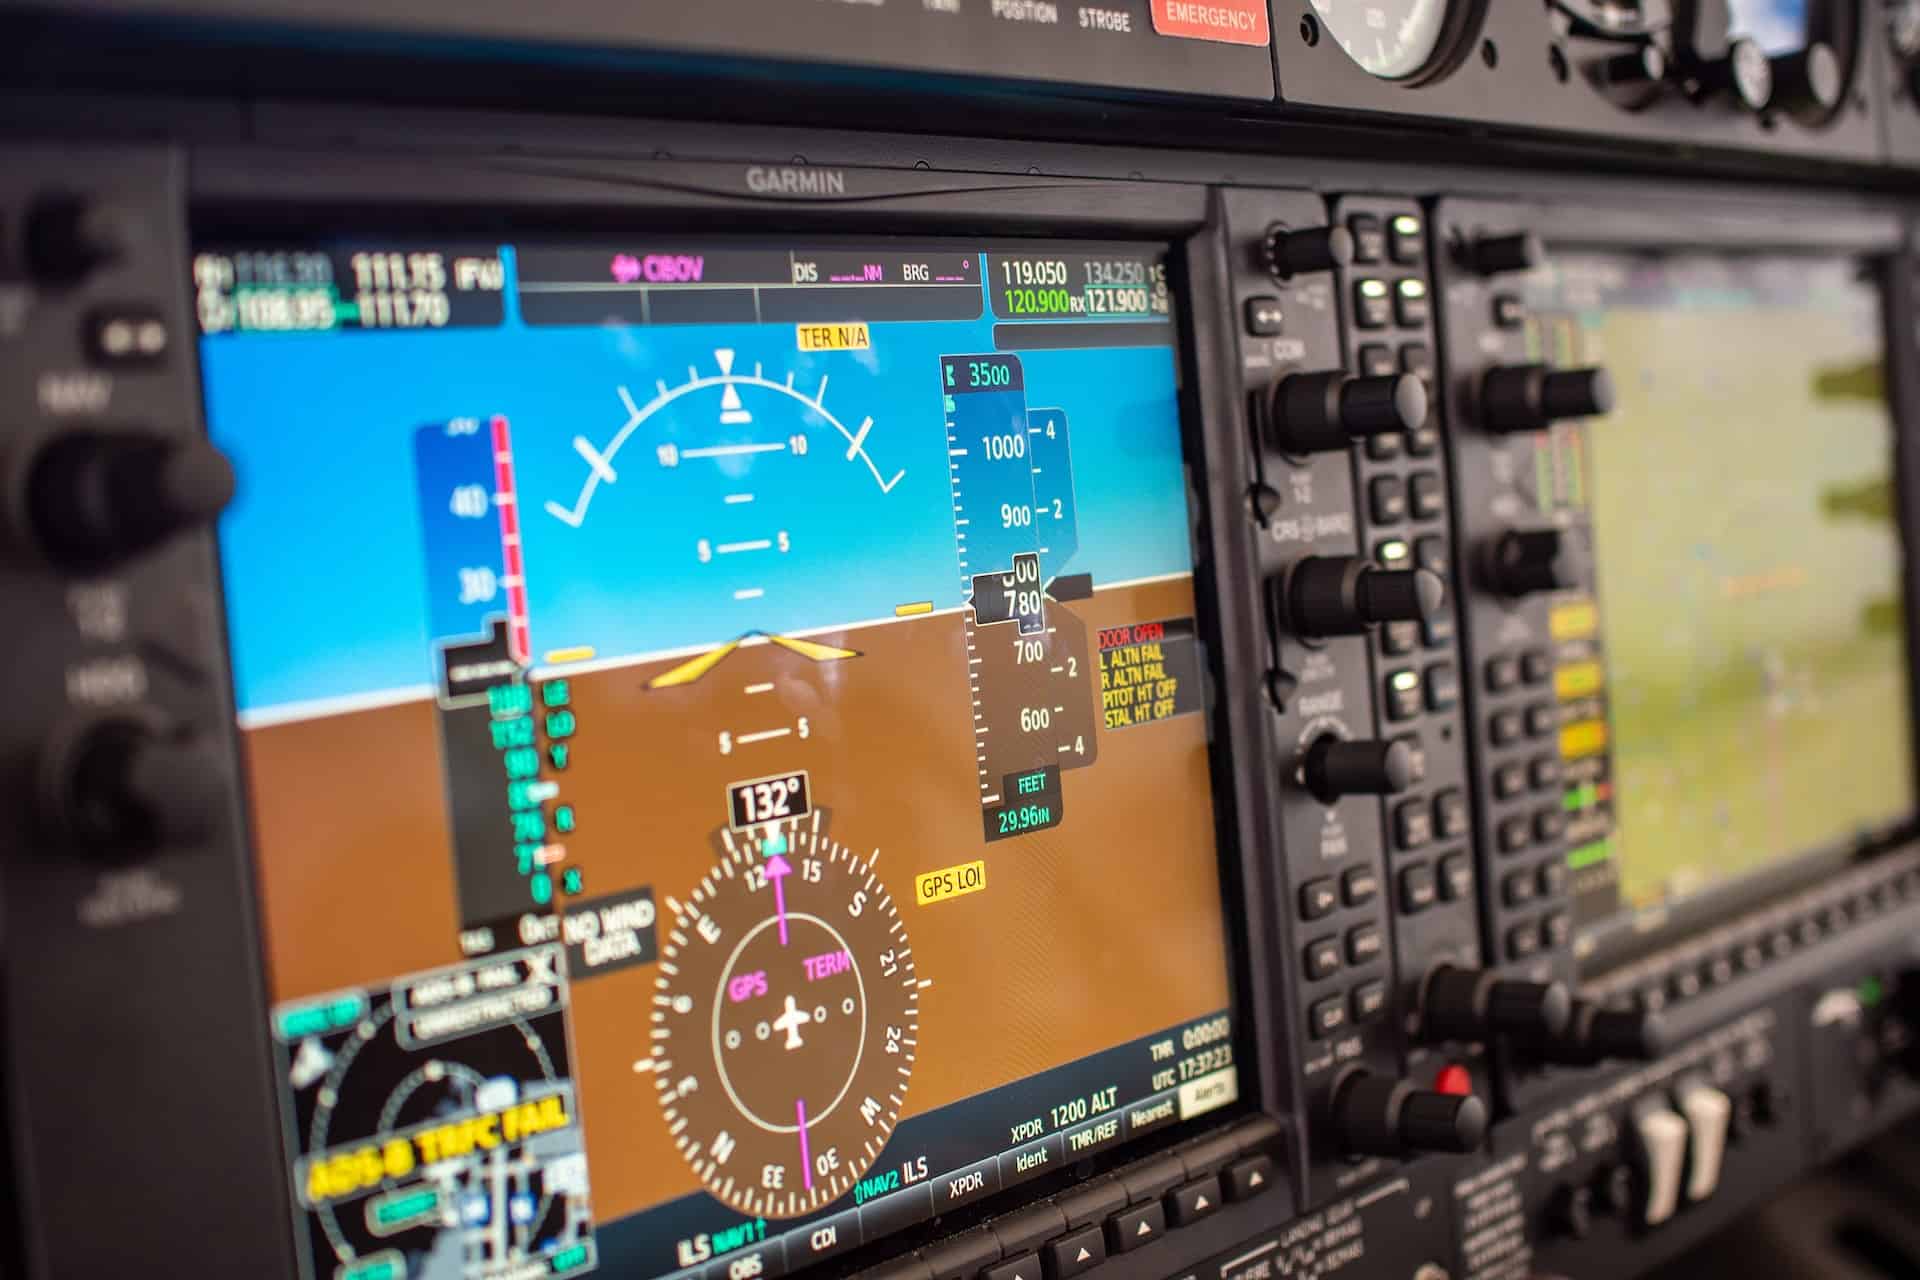 Readings on the display monitor in the cockpit of an aircraft.